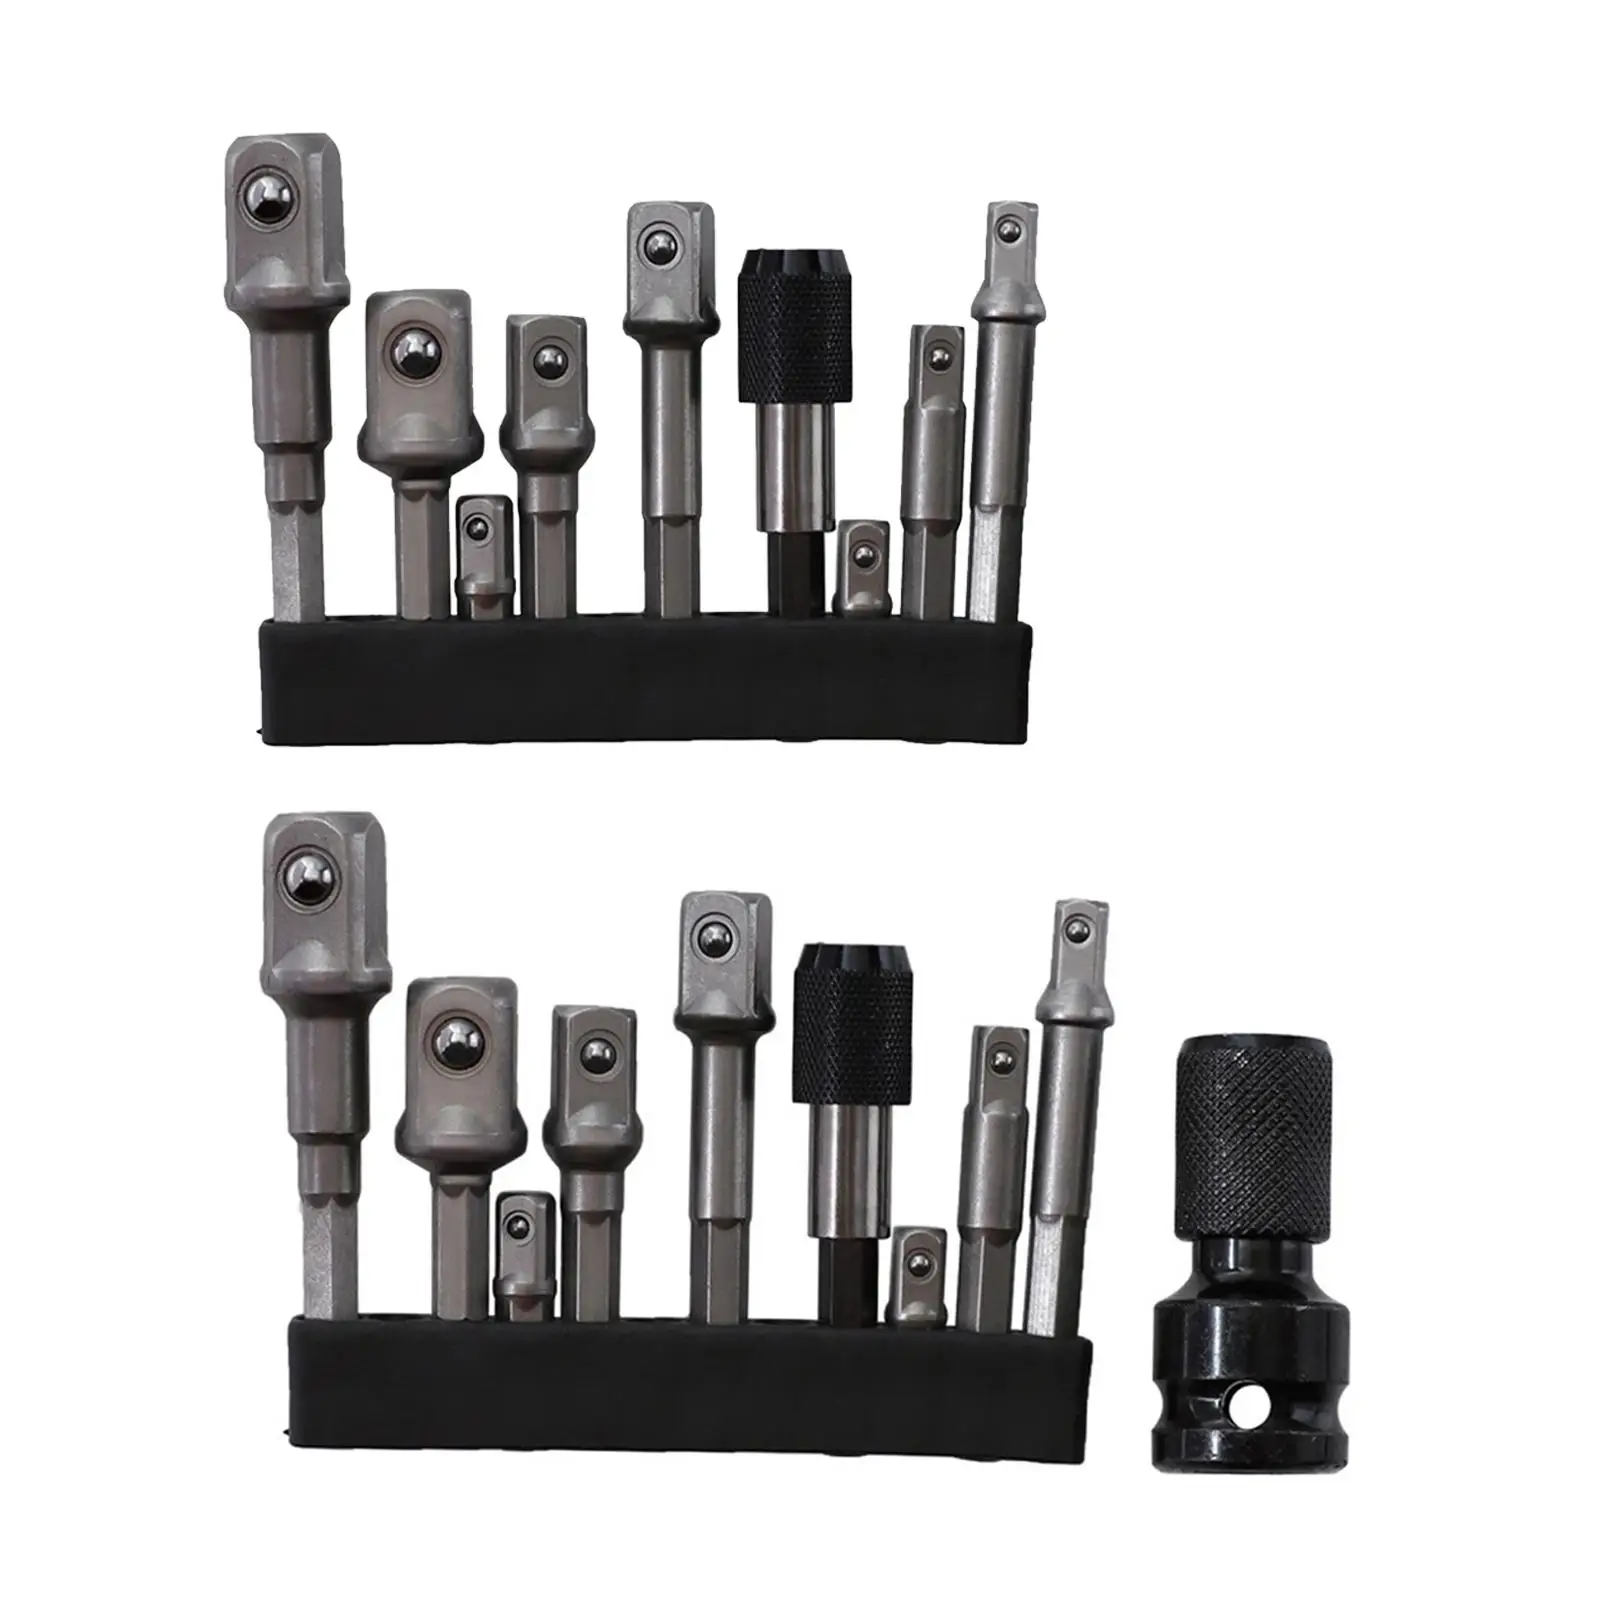 Chrome Impact Grade Socket Adapter Set Extension Set 8Pcs Drill Adapters Hardware for Power Drill Driver Electric Screwdriver